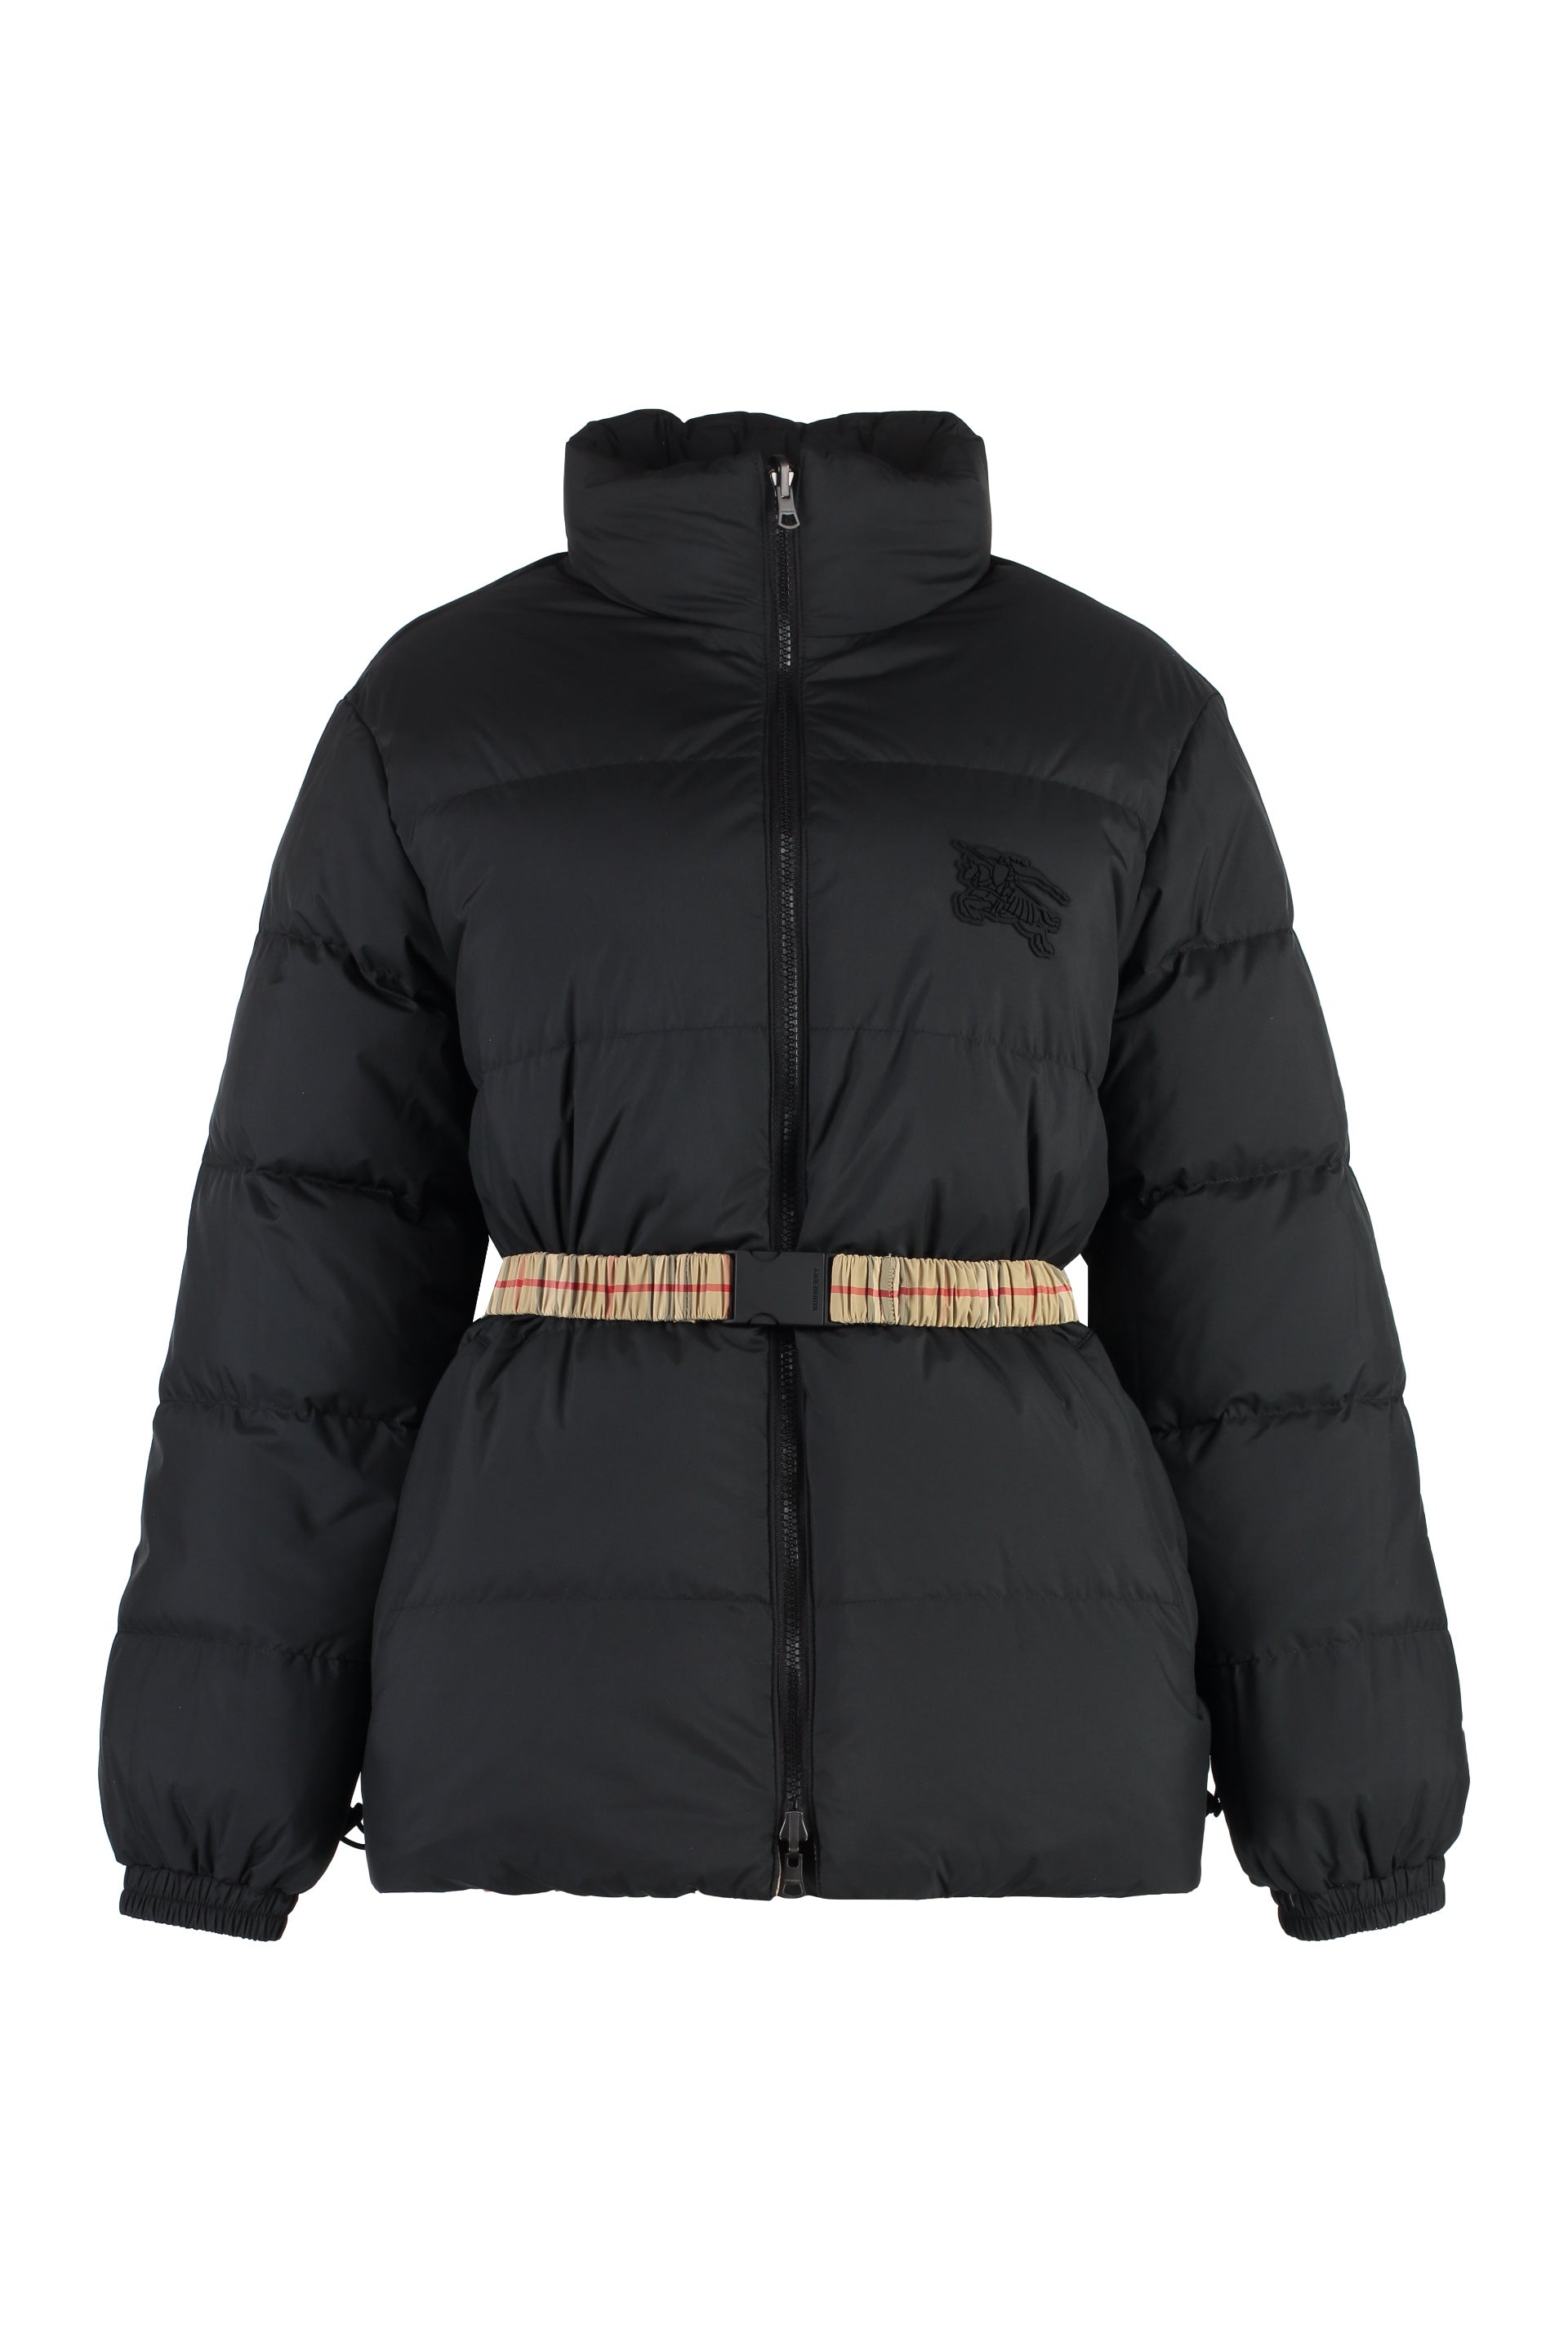 Shop Burberry Reversible Hooded Down Jacket For Women In Black